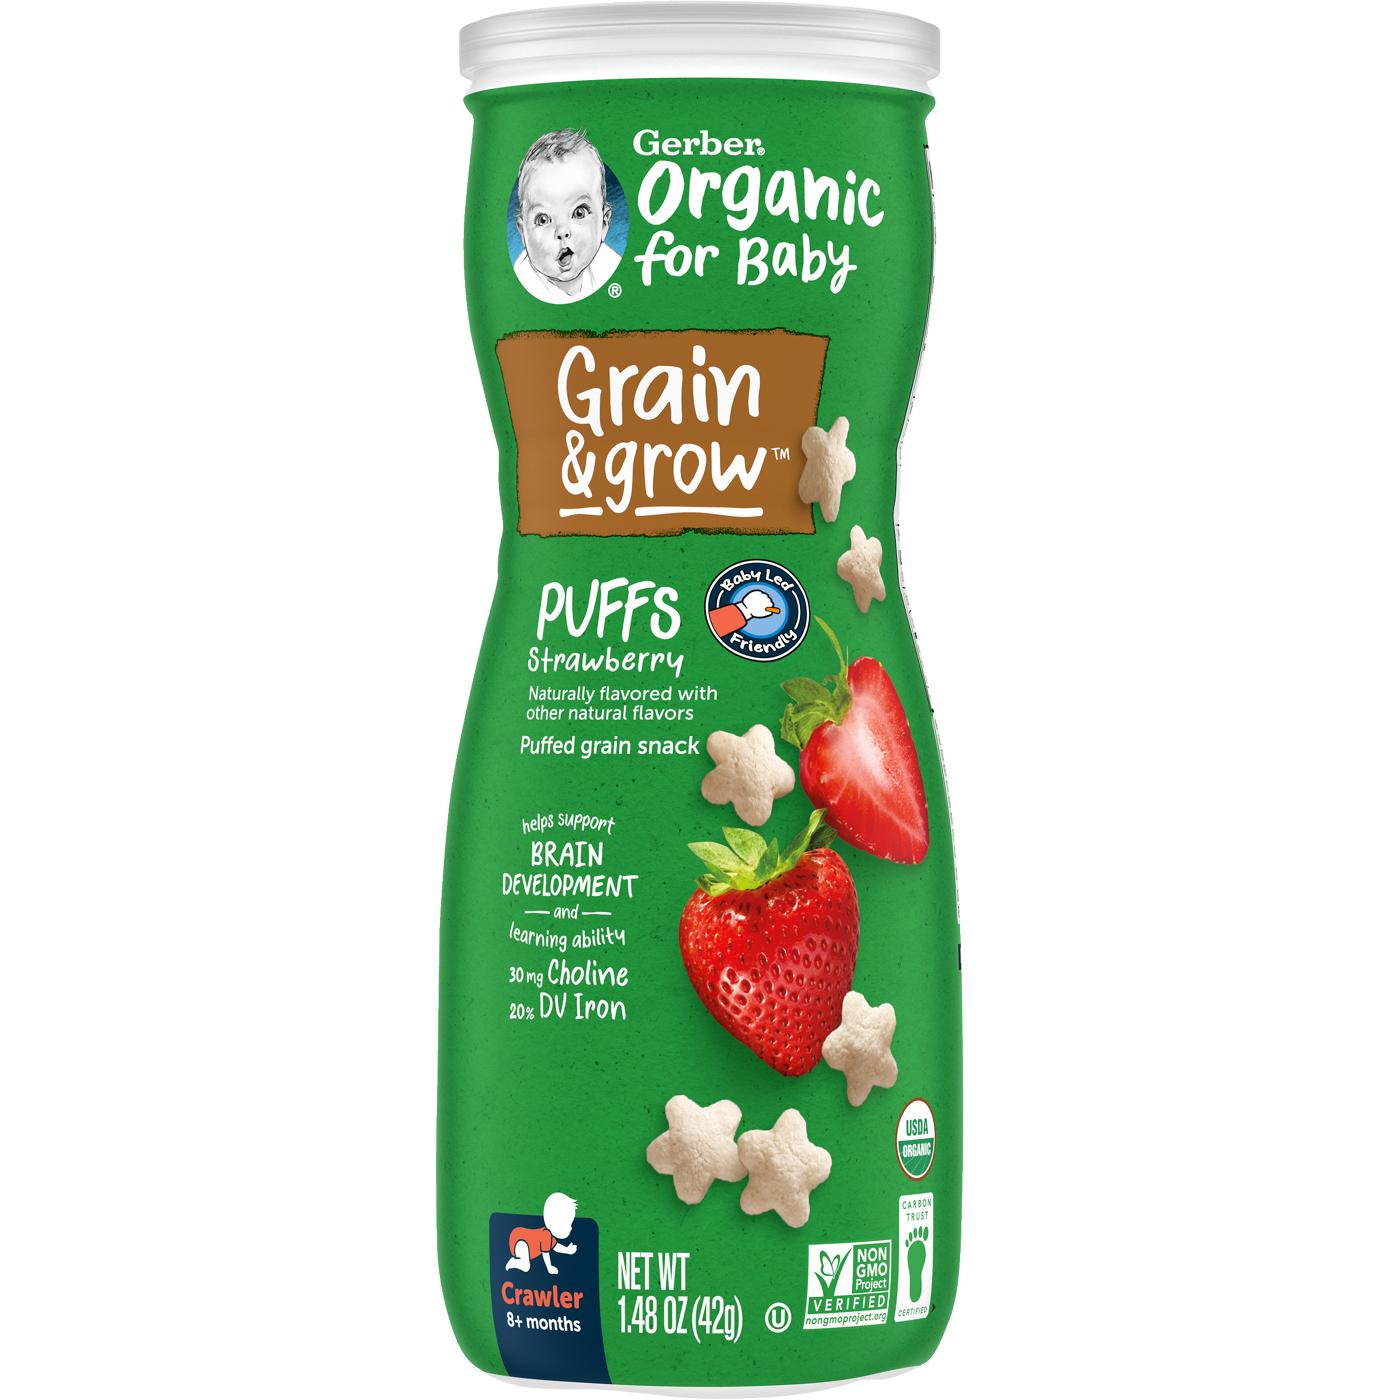 Gerber Organic for Baby Grain & Grow Puffs - Strawberry; image 1 of 3